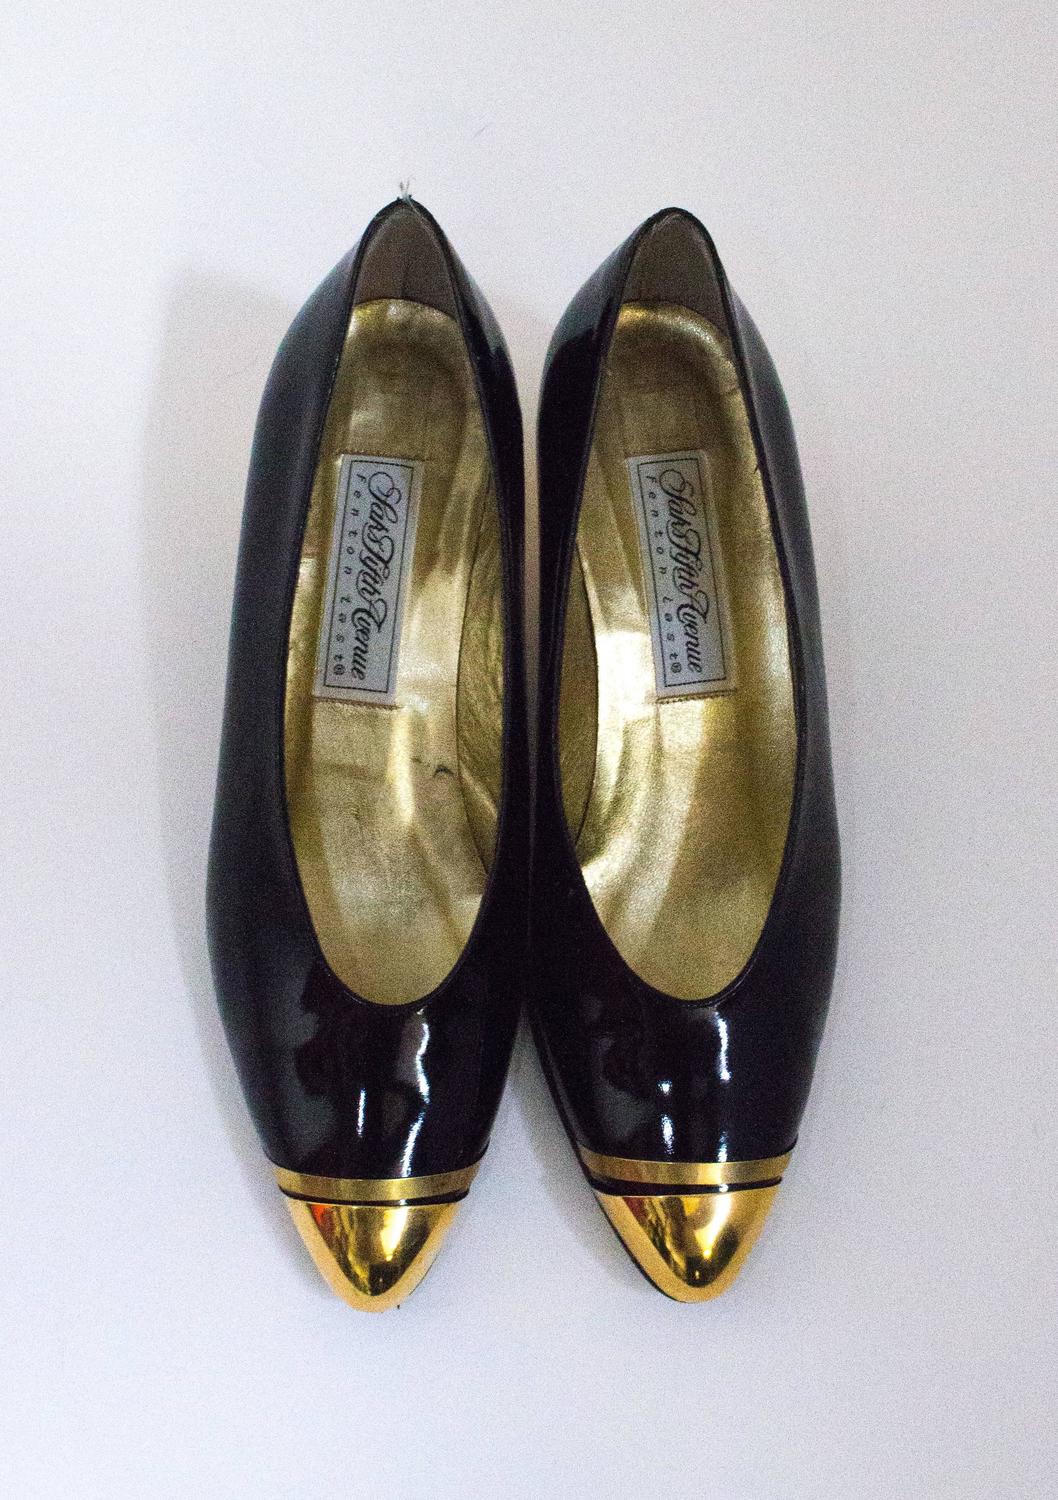 80s Black Patent Leather Heels with Gold Toe Caps ad Heels For Sale at ...